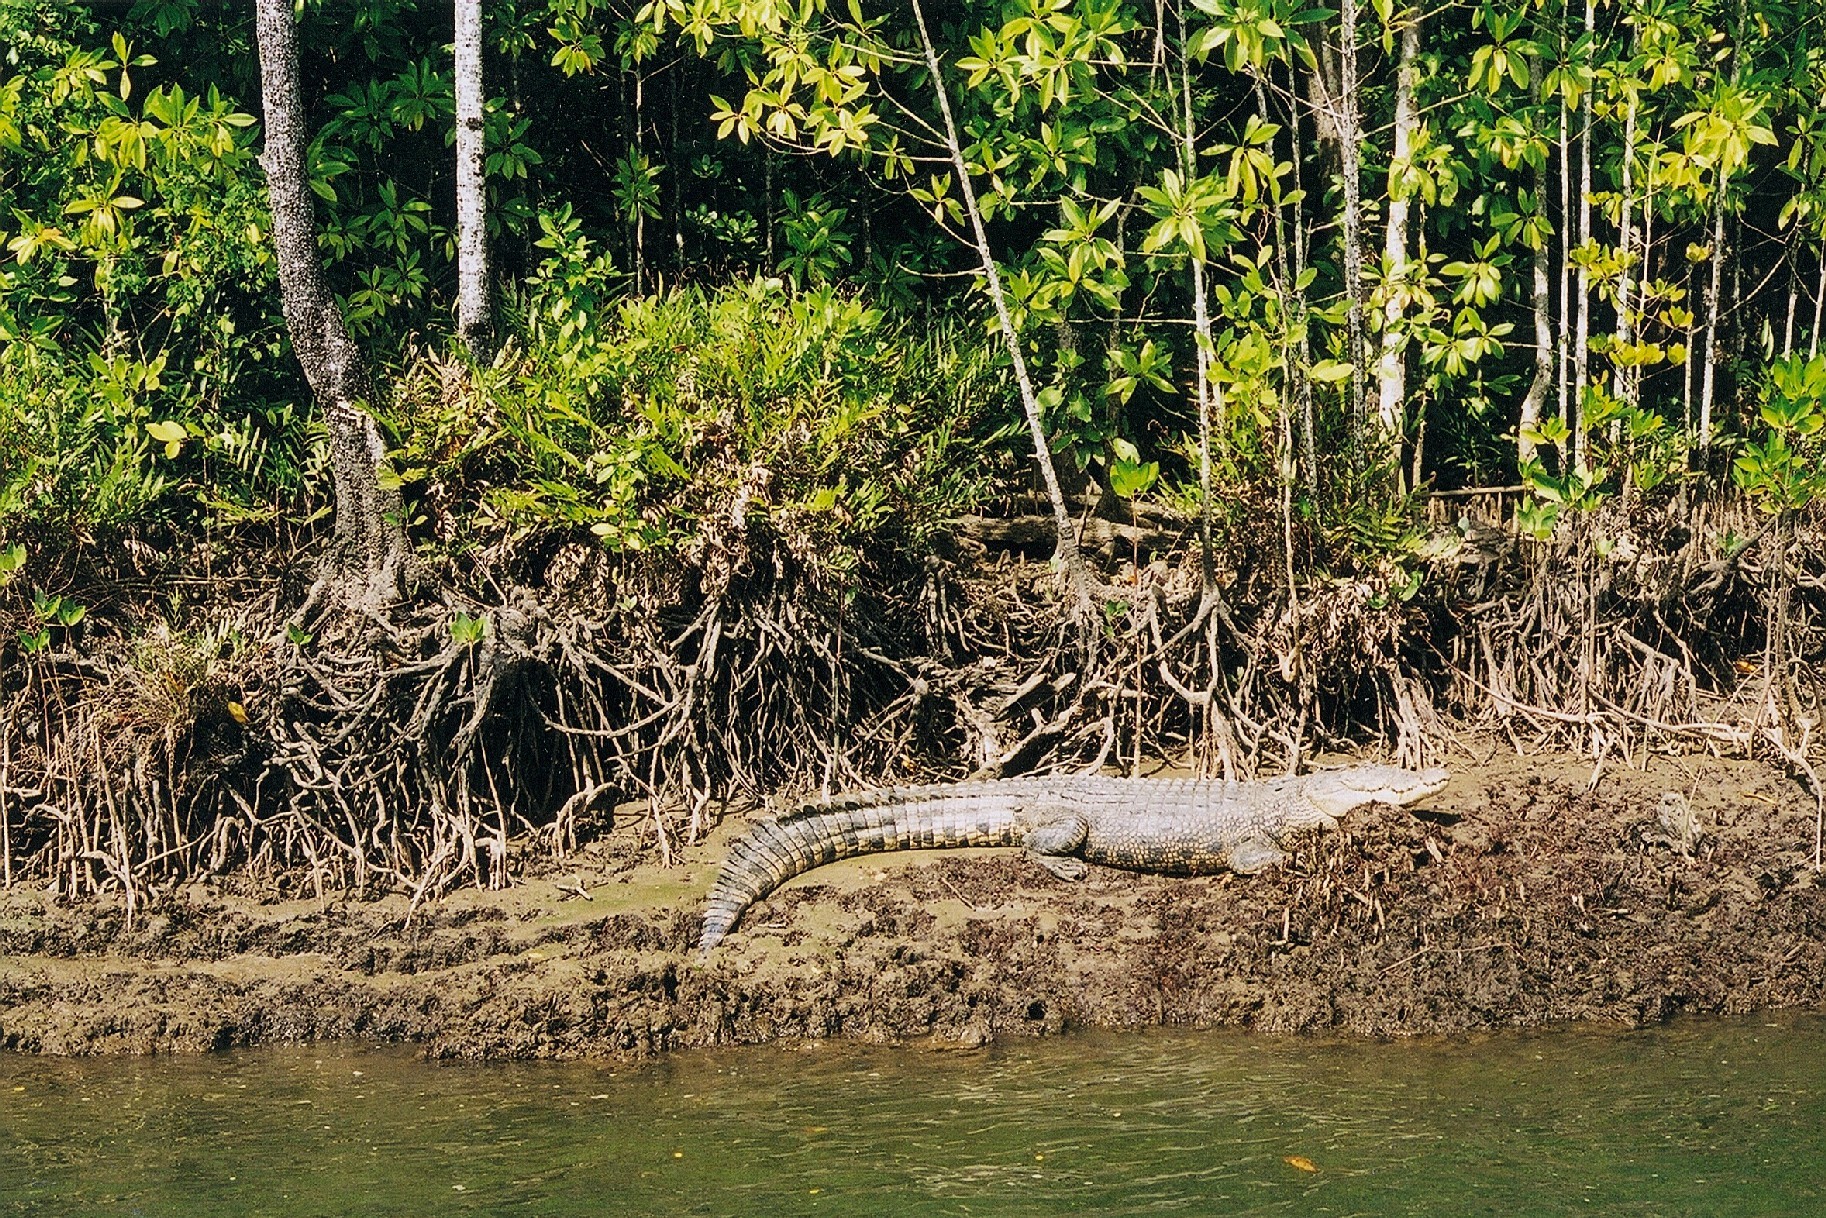 Swamp Dogs in the Daintree river, "CRIKEY"